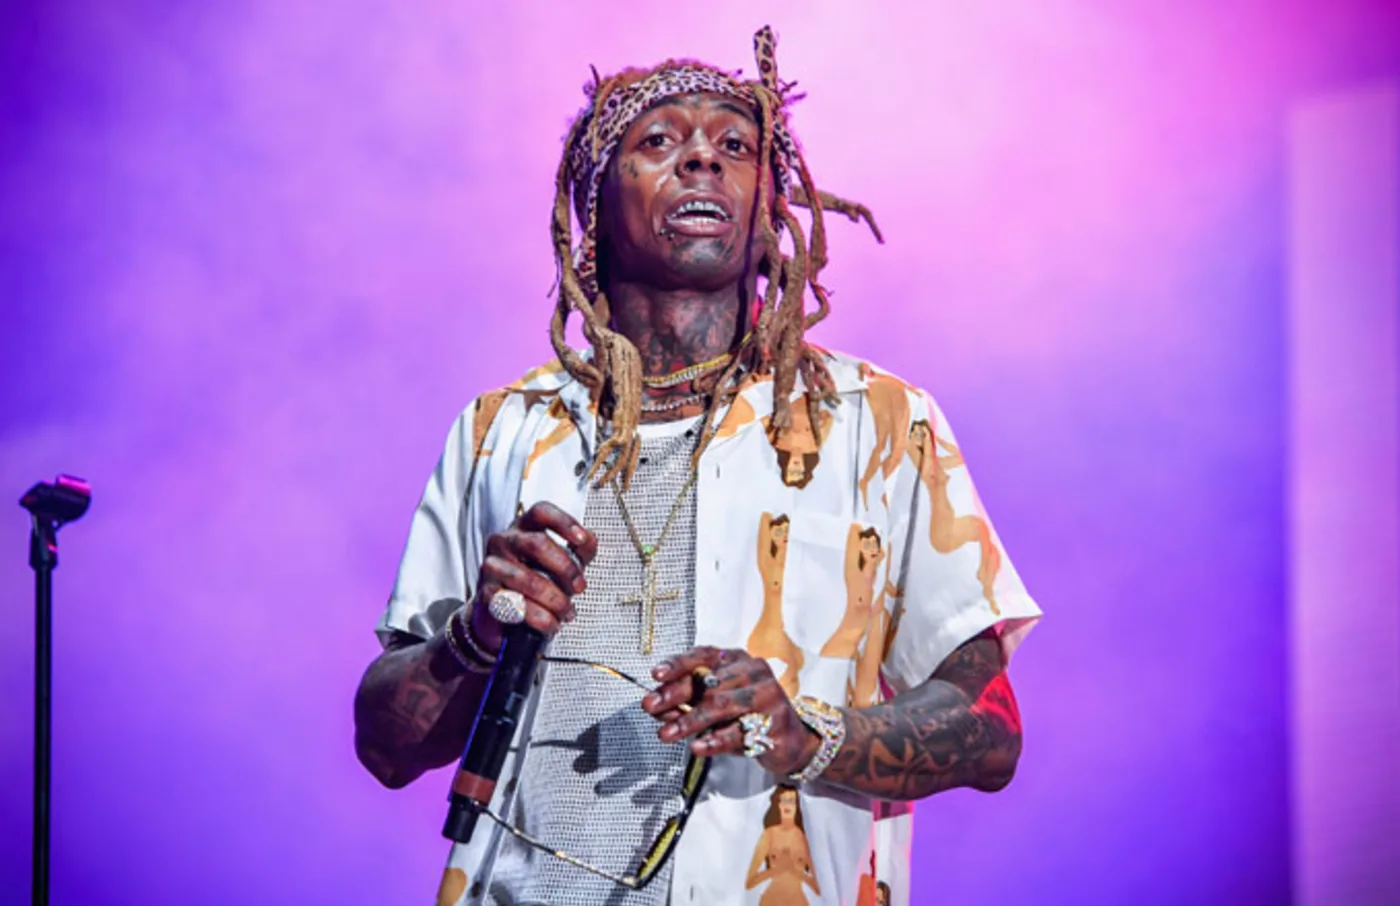 Lil Wayne Discloses How He Attempted Suicide At Age 12